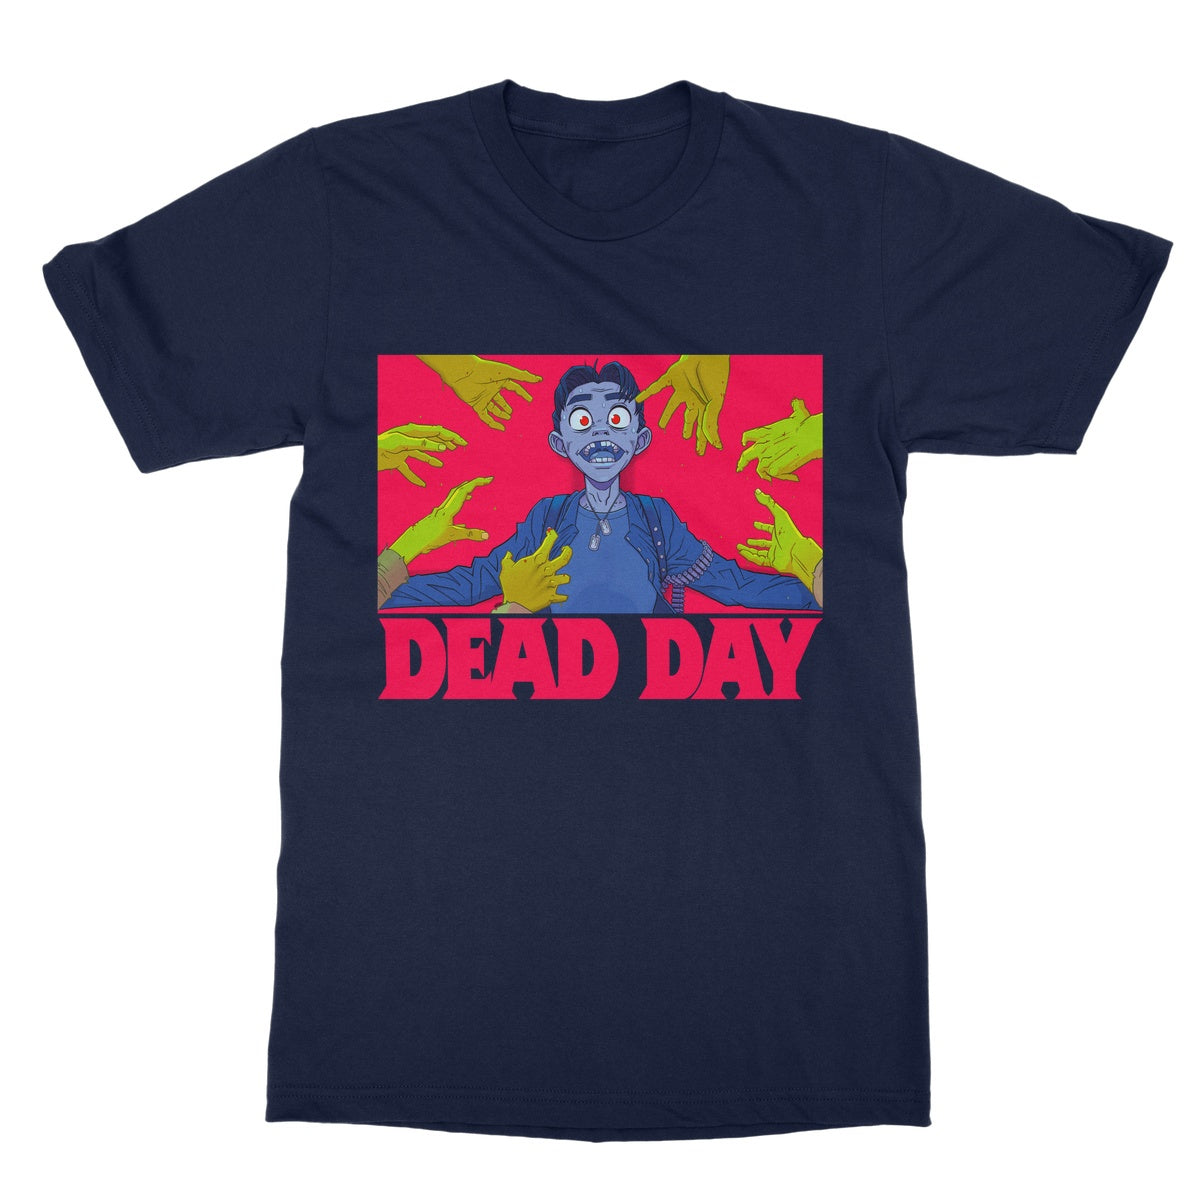 Dead Day Zombie T-Shirt Navy Blue